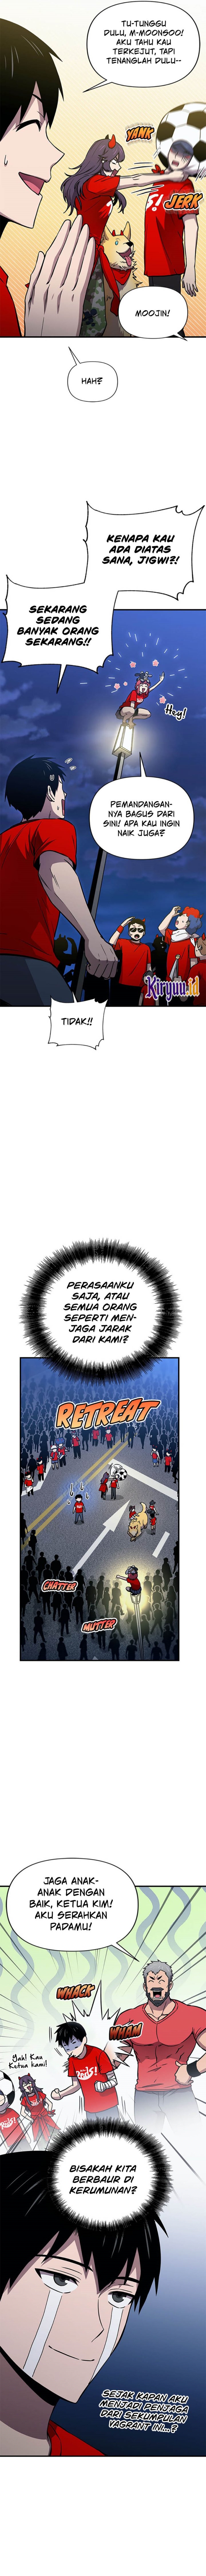 Cursed Manager’s Regression Chapter 35 3